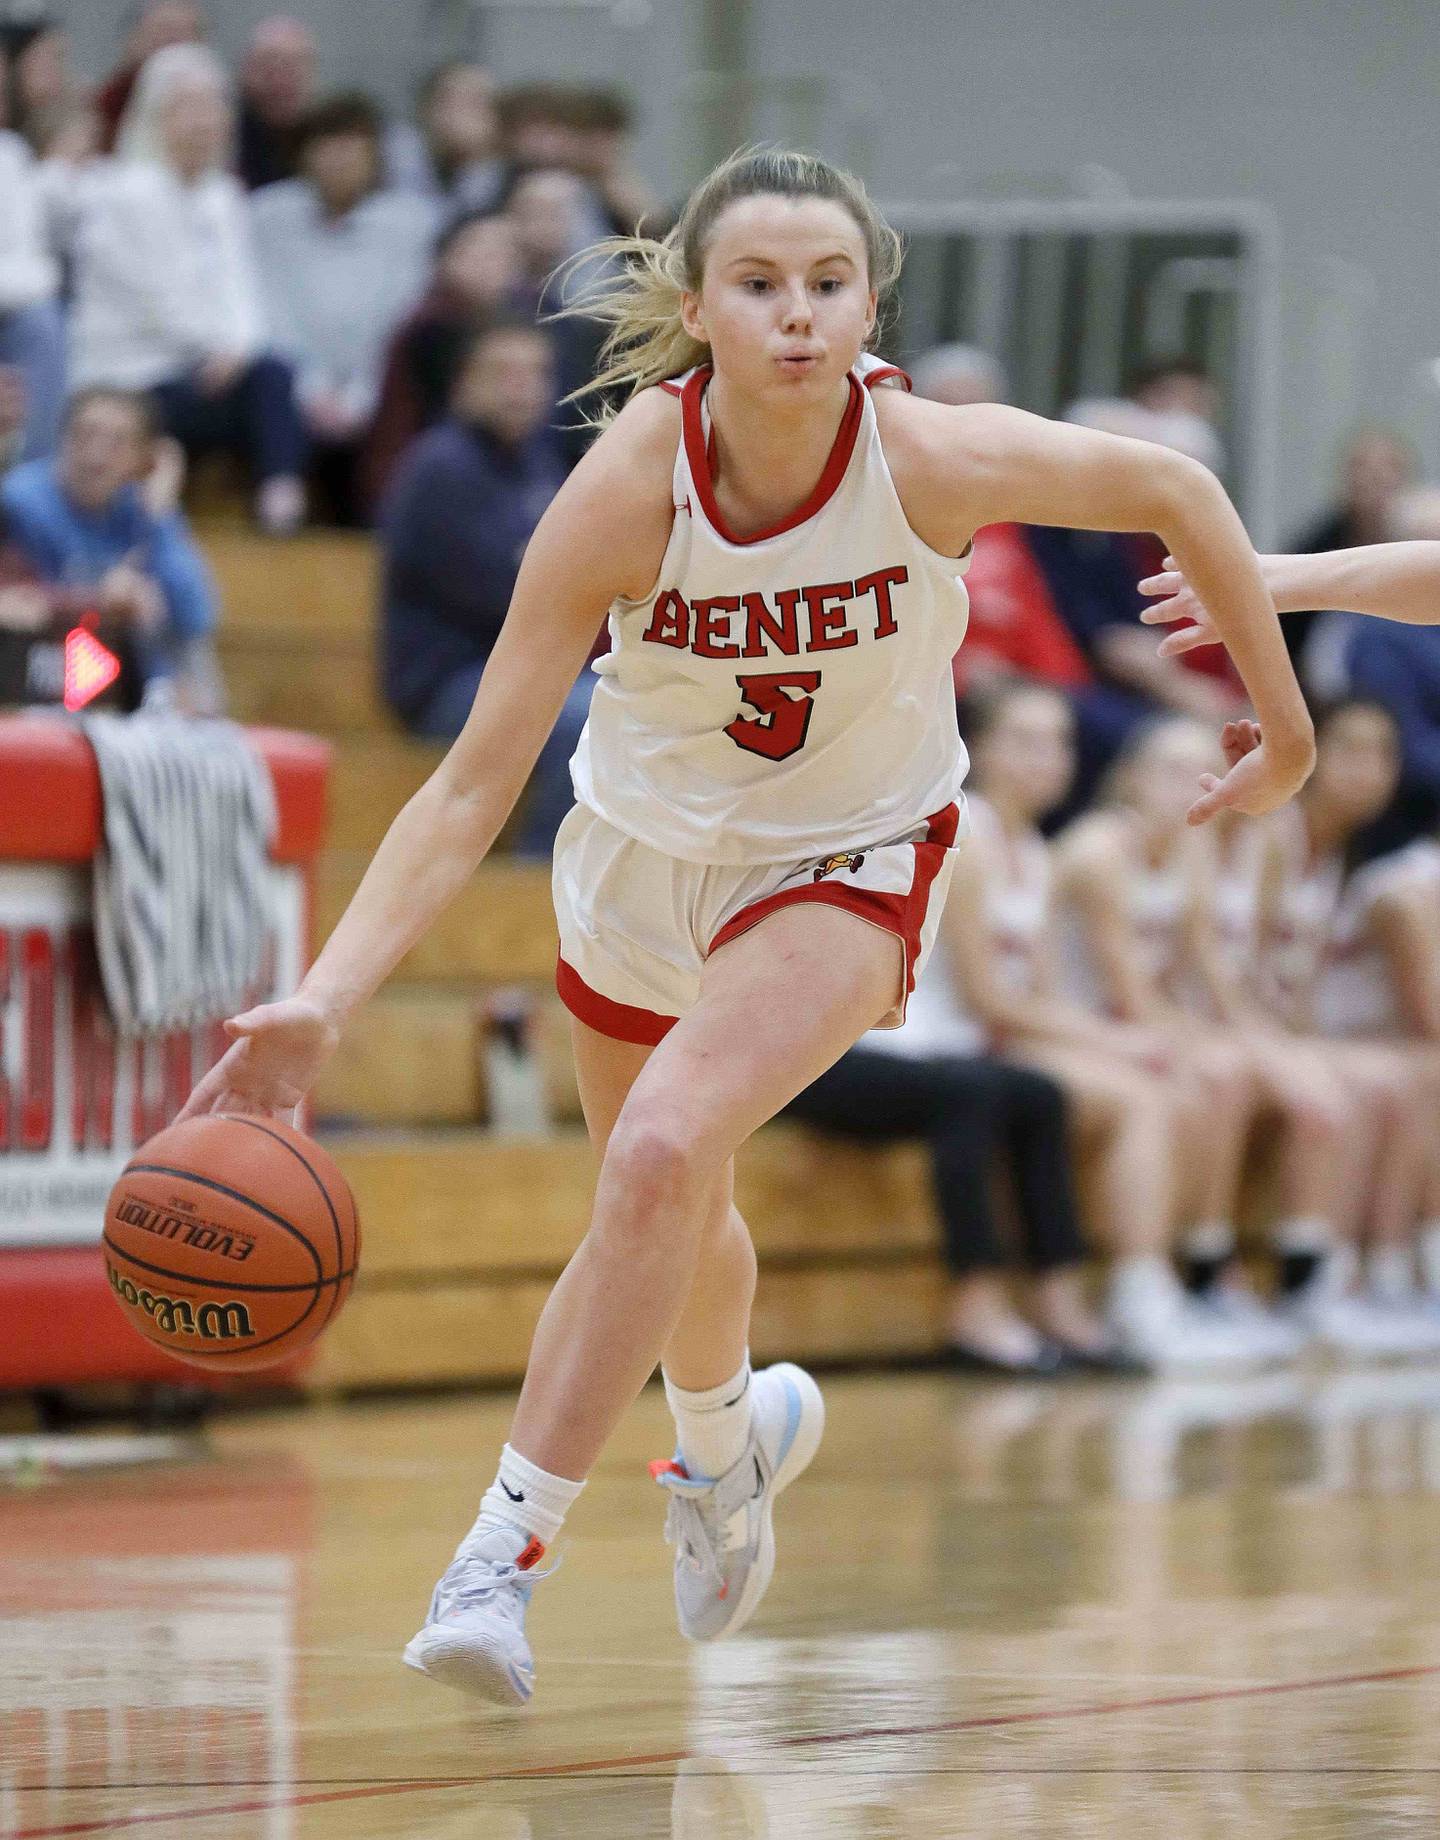 Brian Hill/bhill@dailyherald.com
Benet's Lenee Beaumont (5) drives to the hoop Friday November 25, 2022 in Lisle.